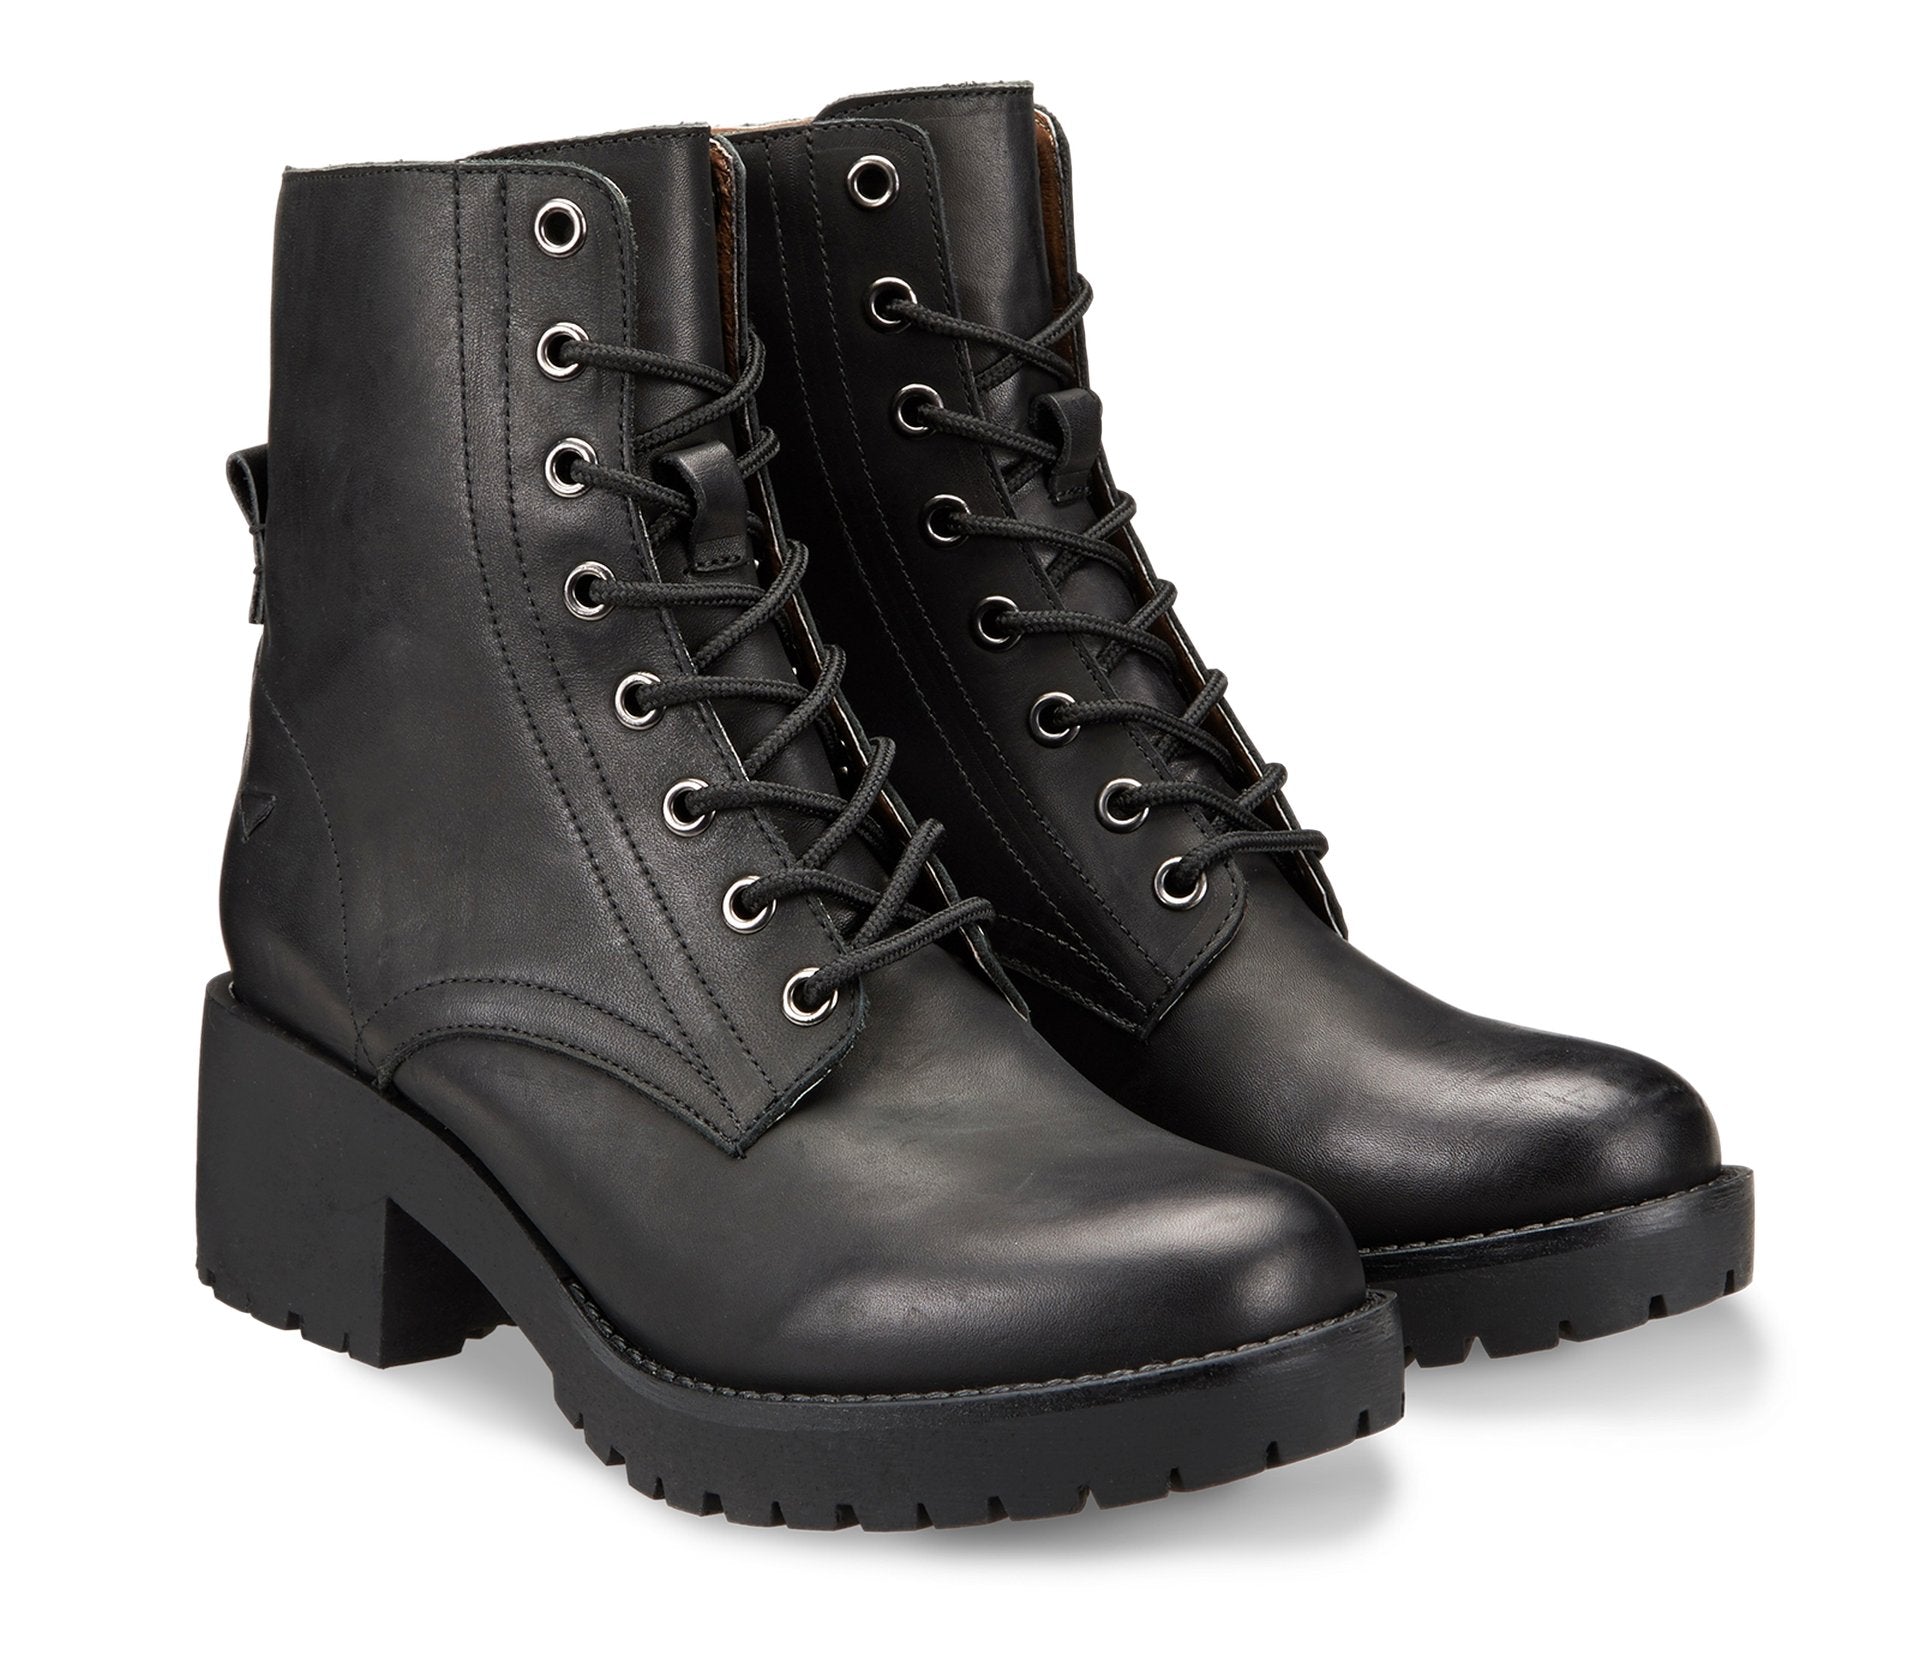 Women's black leather ankle boot